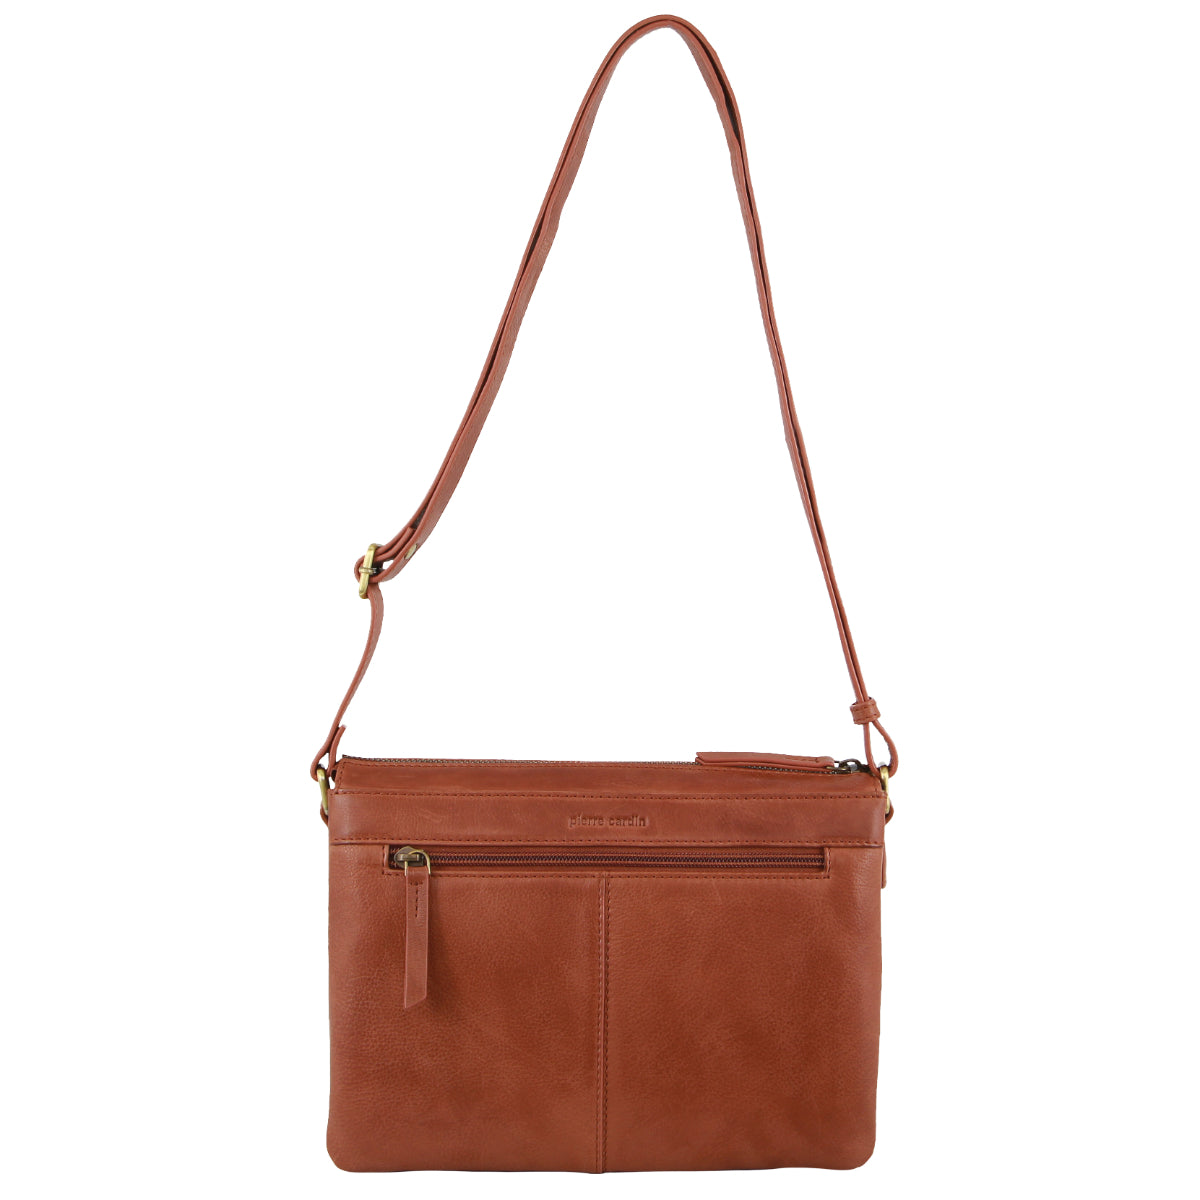 Pierre Cardin Leather Layered Style Crossbody Bag in Tan